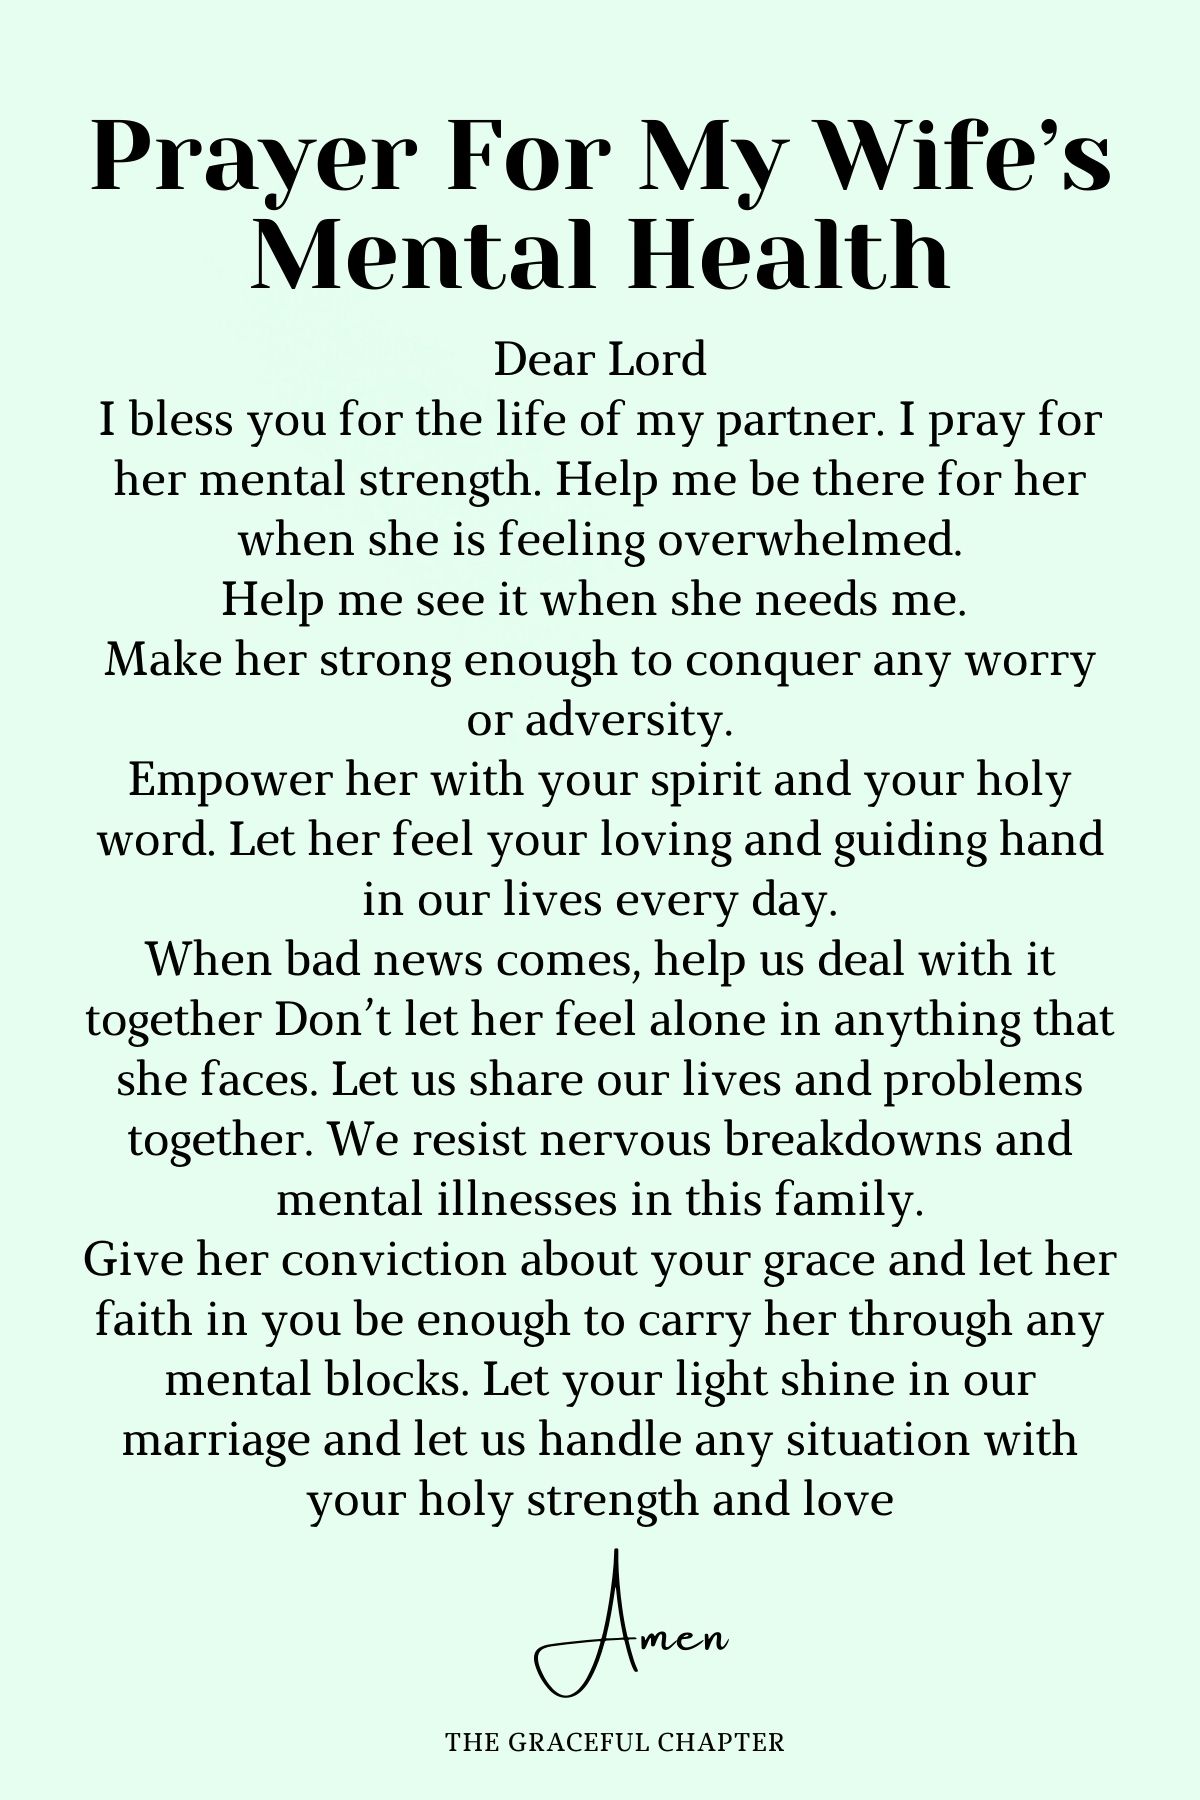 Prayer for my wife’s mental health